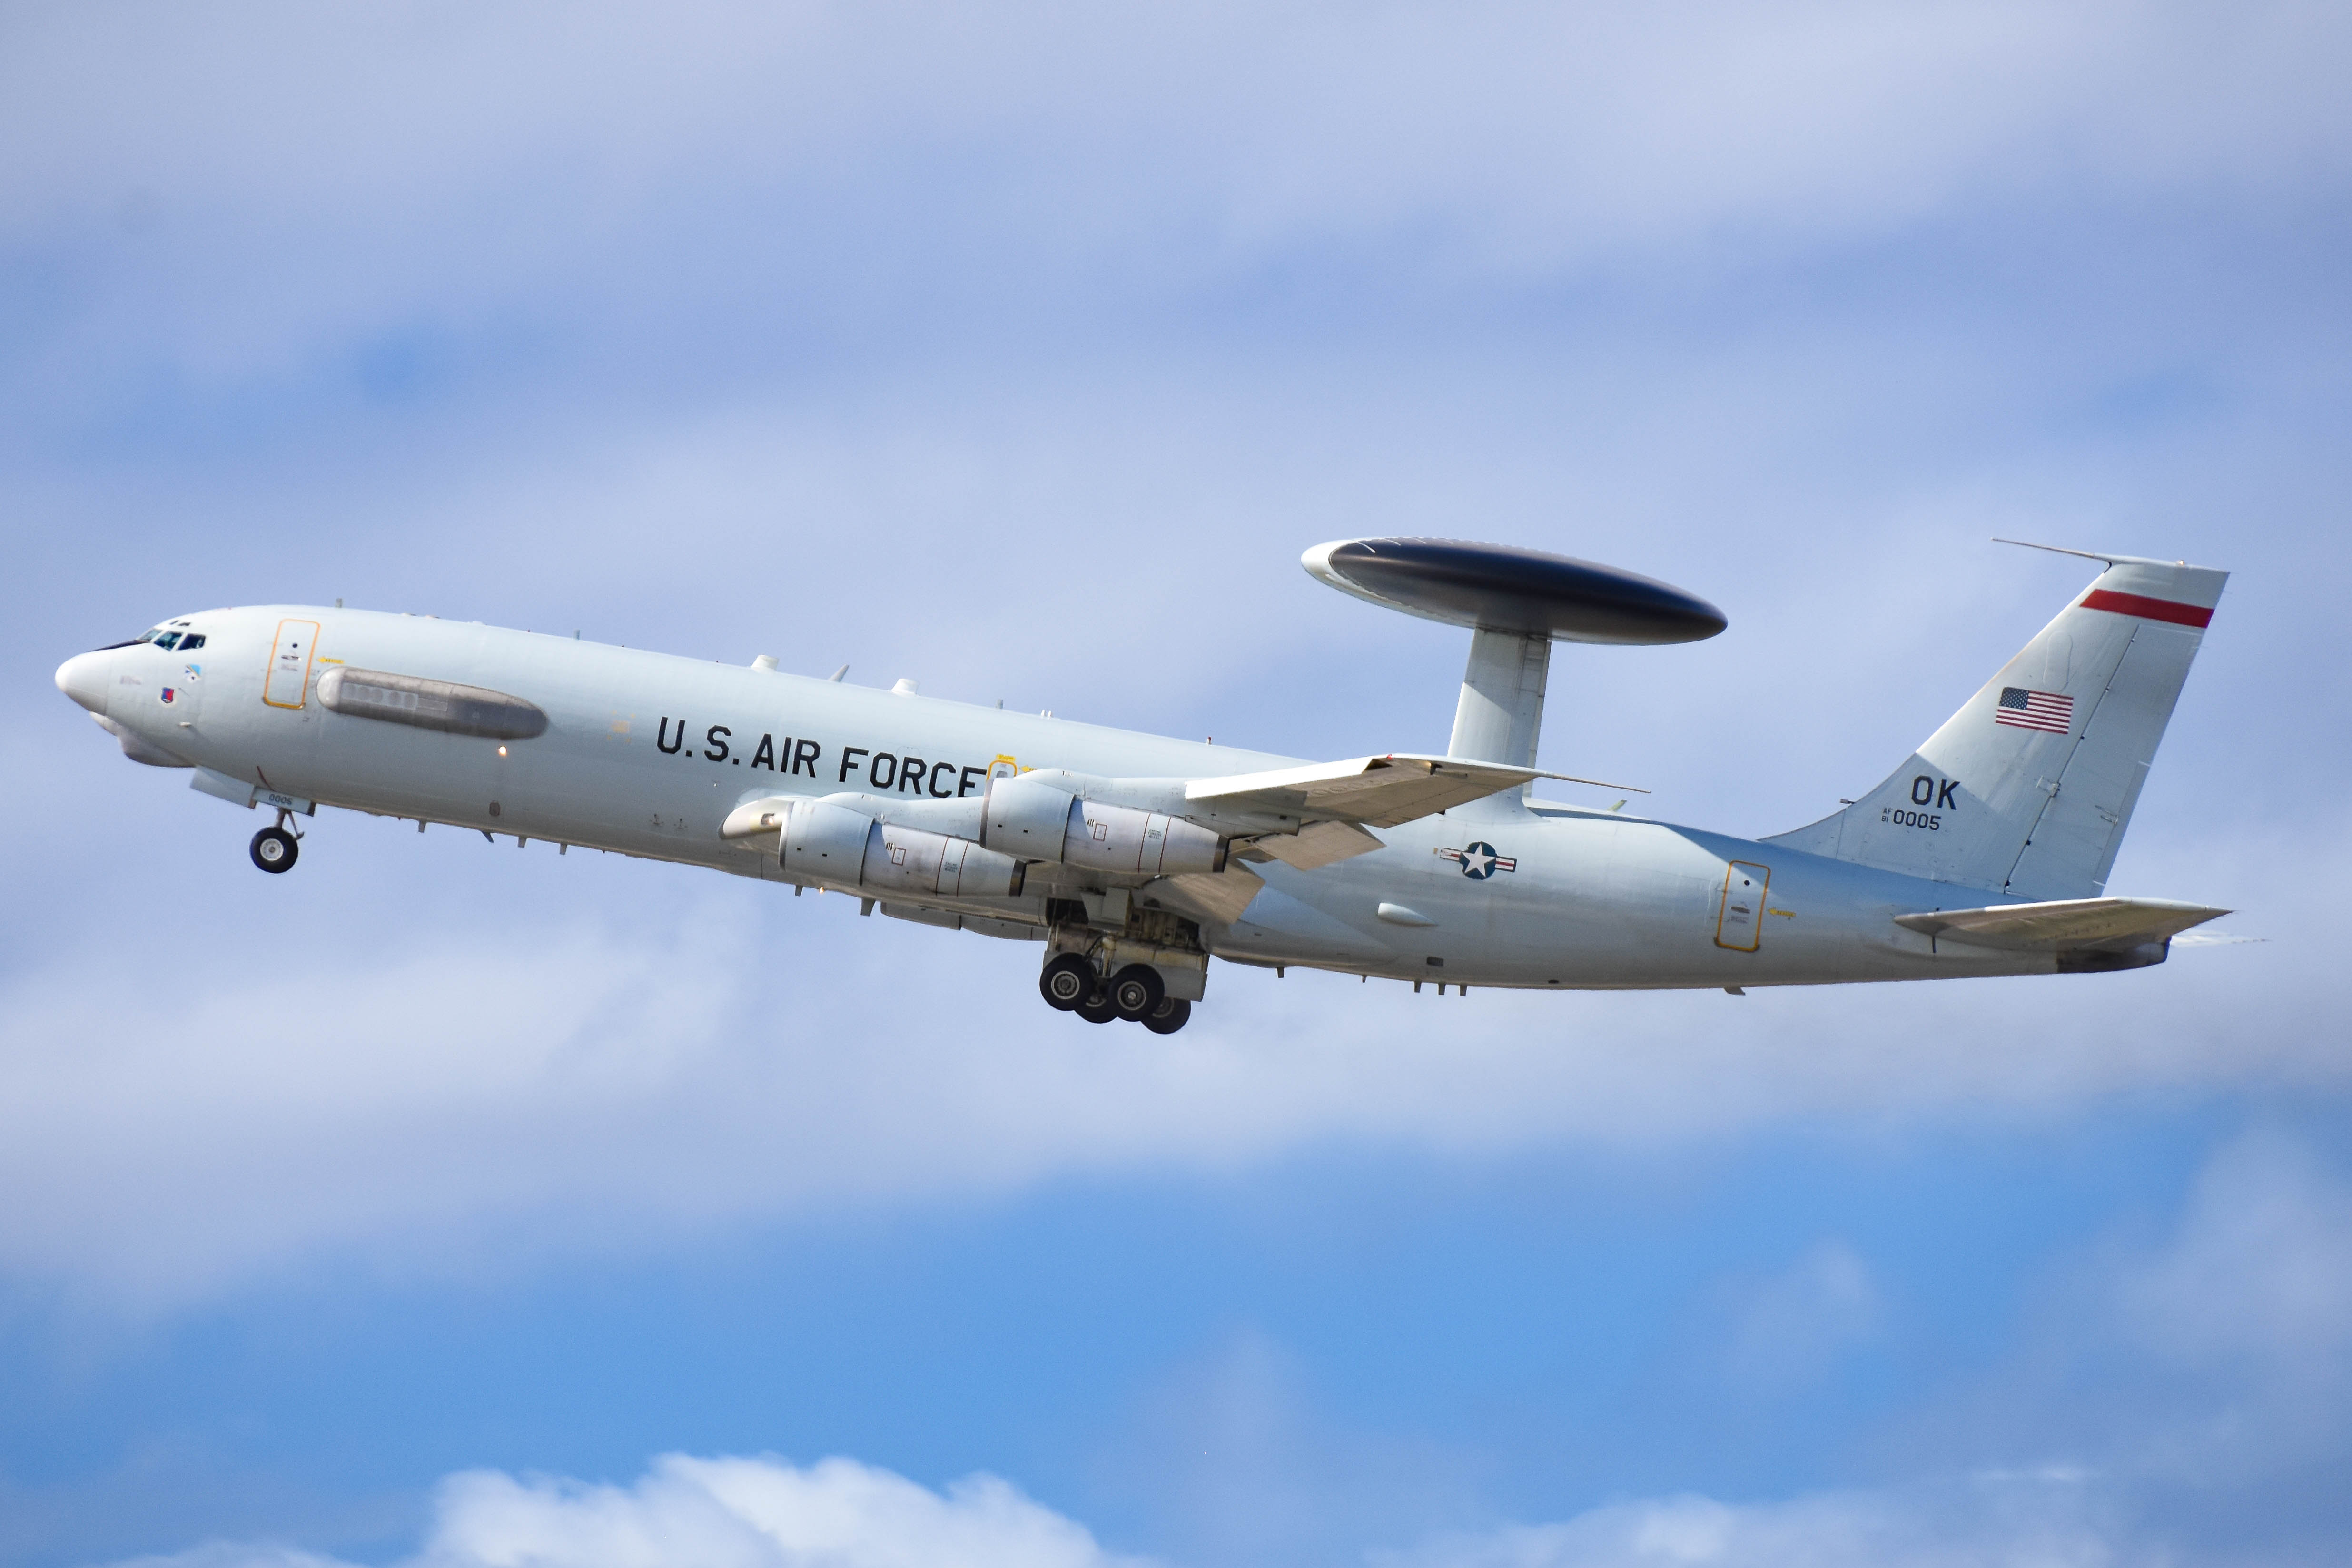 81-0005/810005 USAF - United States Air Force Boeing E-3C Sentry Photo by colinw - AVSpotters.com